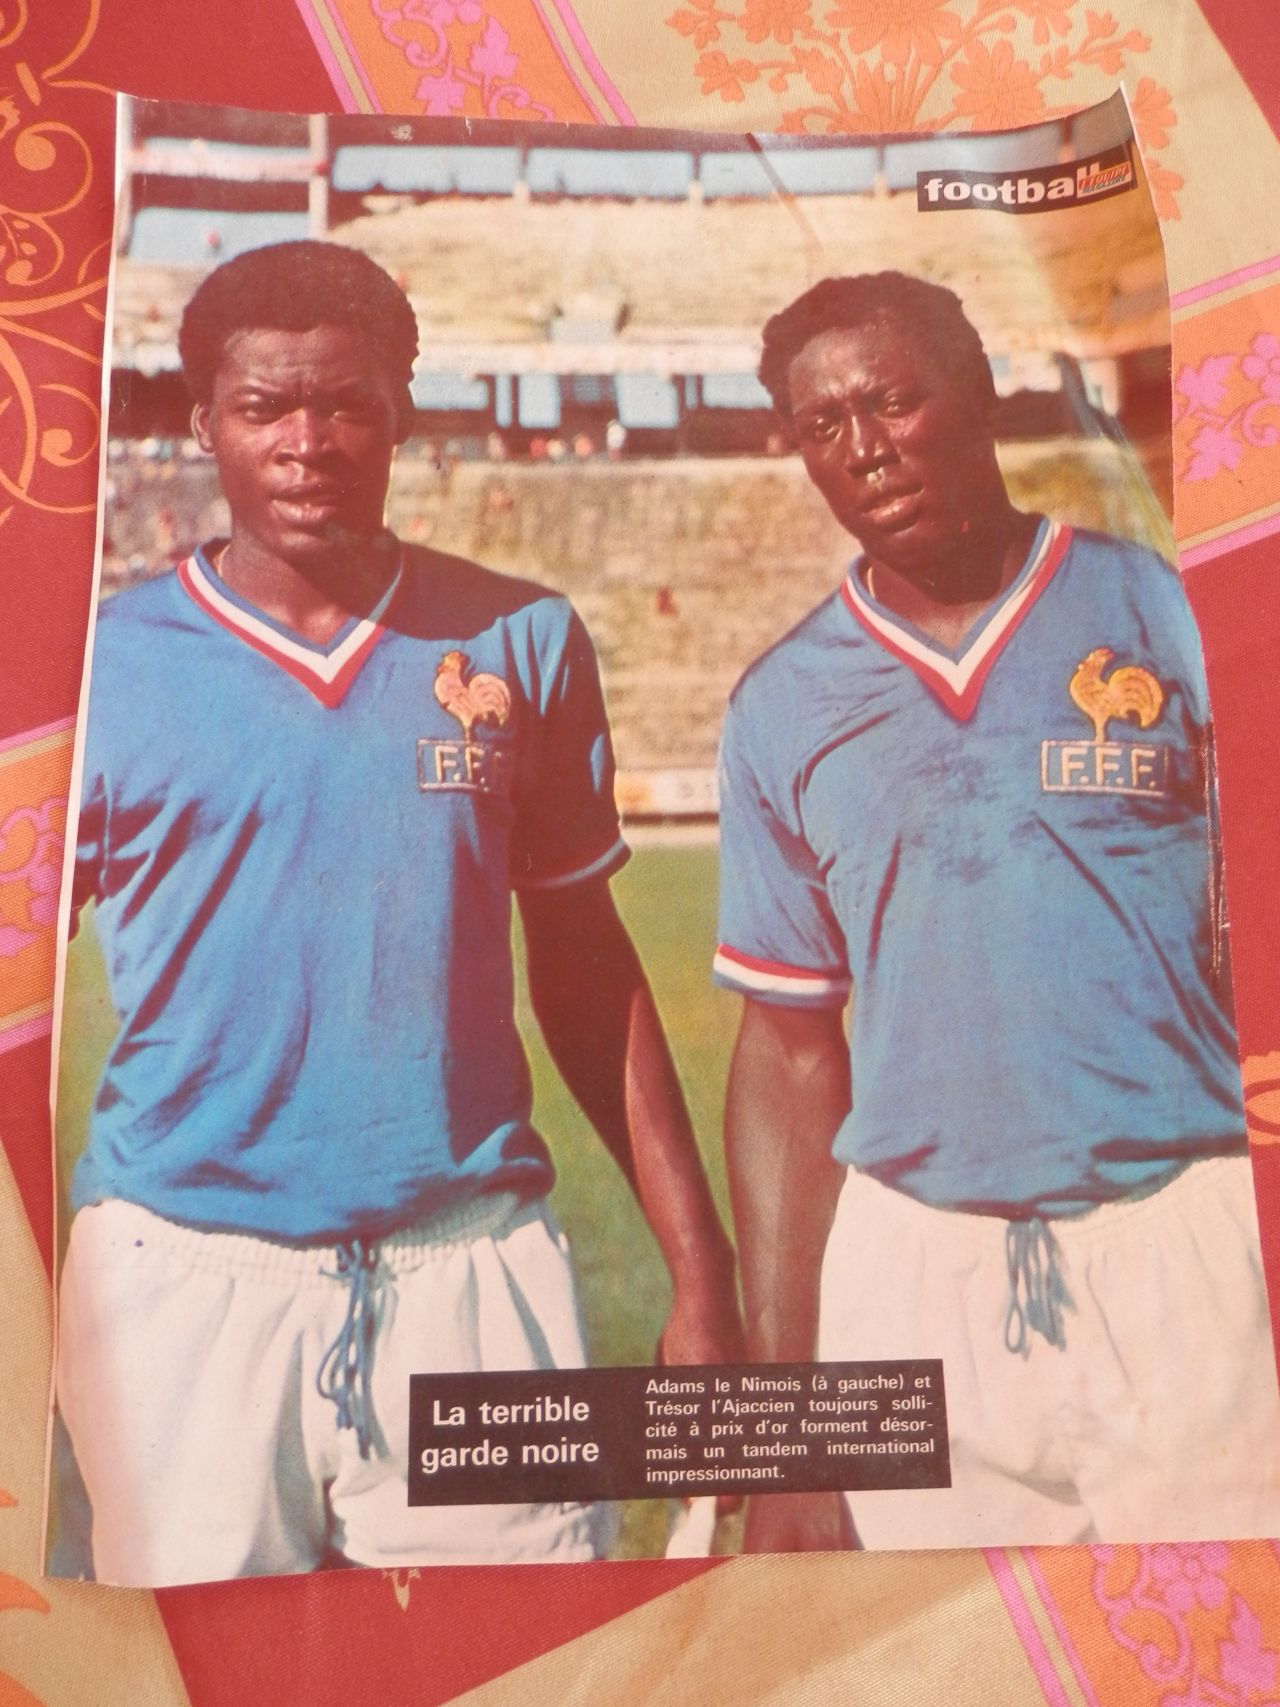 Marius Trésor (left) and Adams (right) formed a defensive unit known as the "Garde Noire" or "Black Guard." It was the first time France had ever had two Black players in the center of defense. 